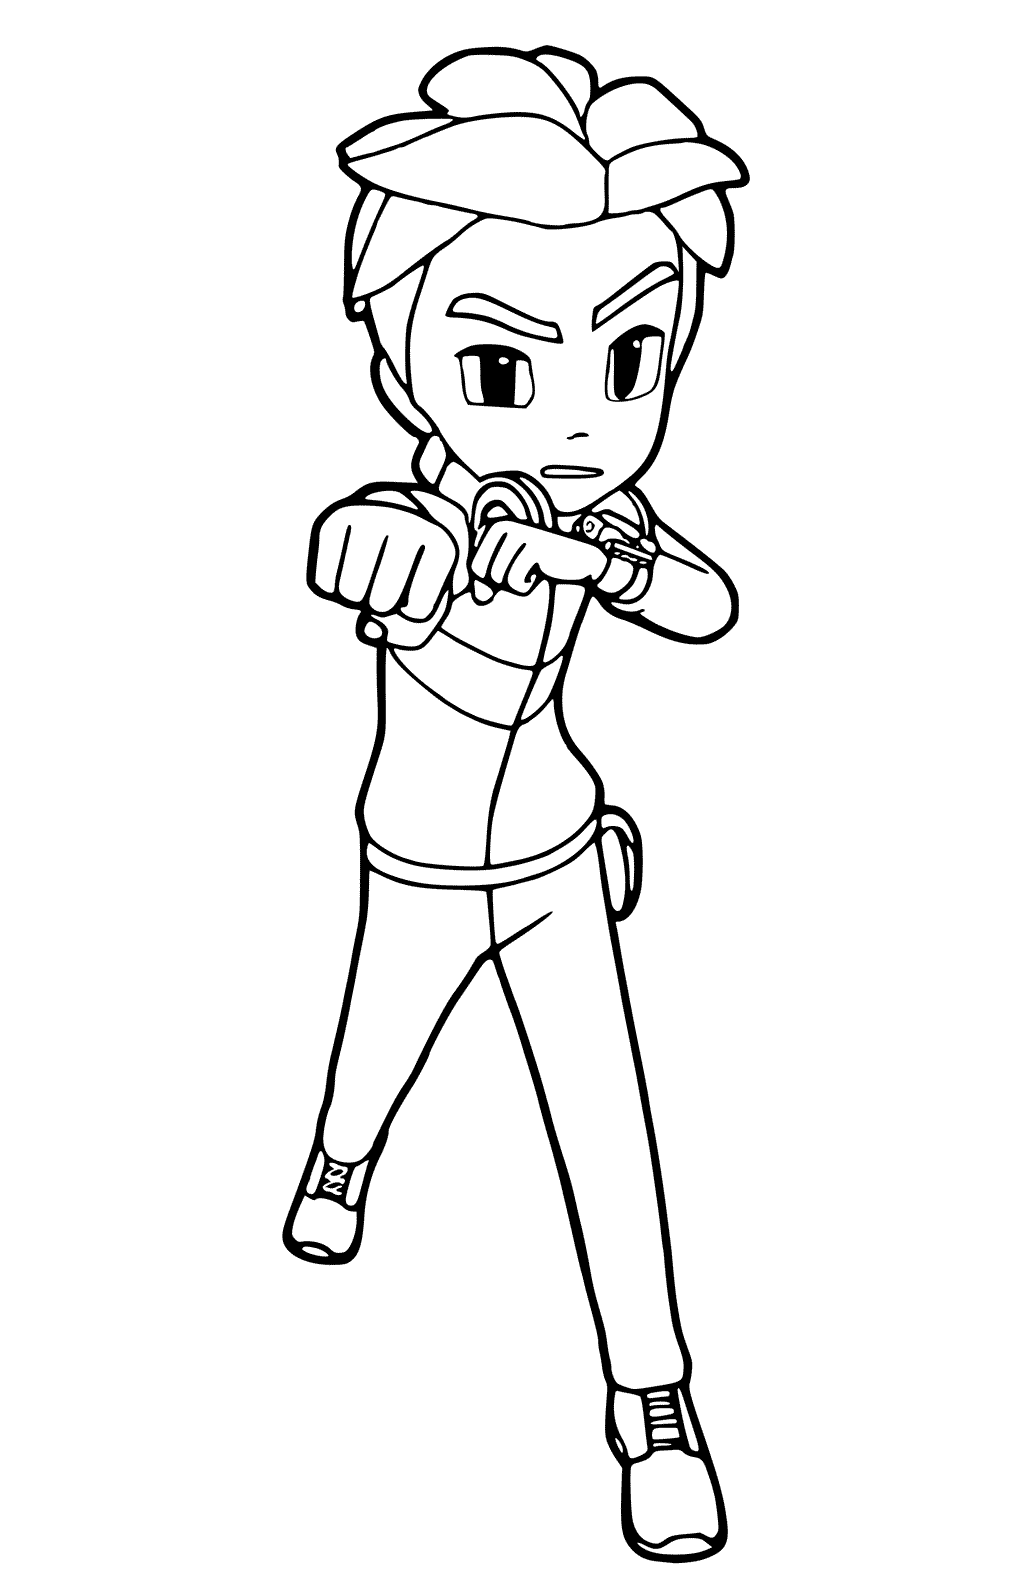 Dylan from Tobot Coloring Pages